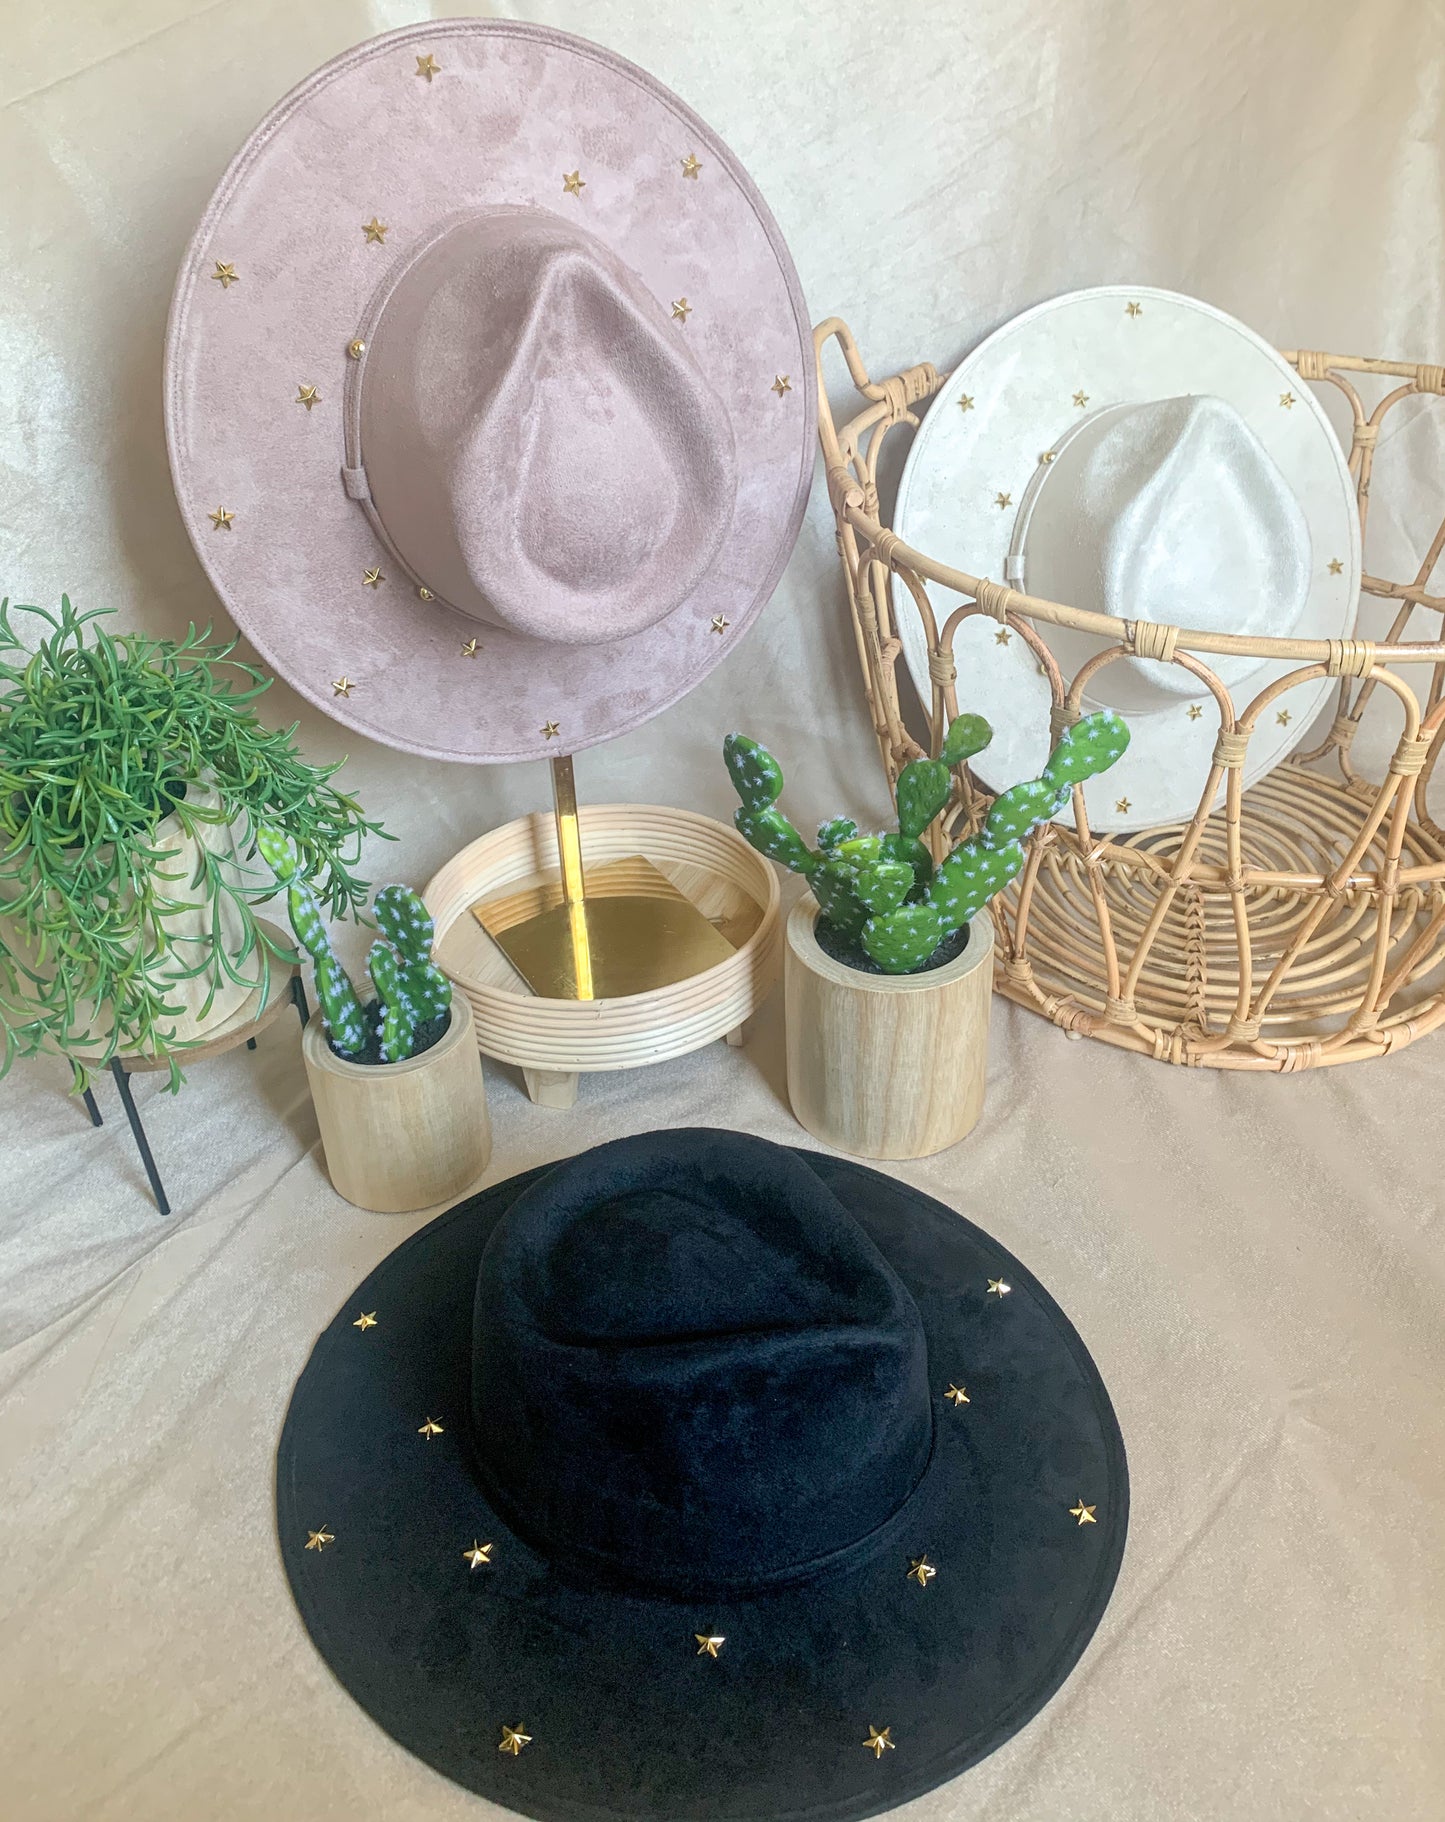 The Starra Hat- Dusty Rose